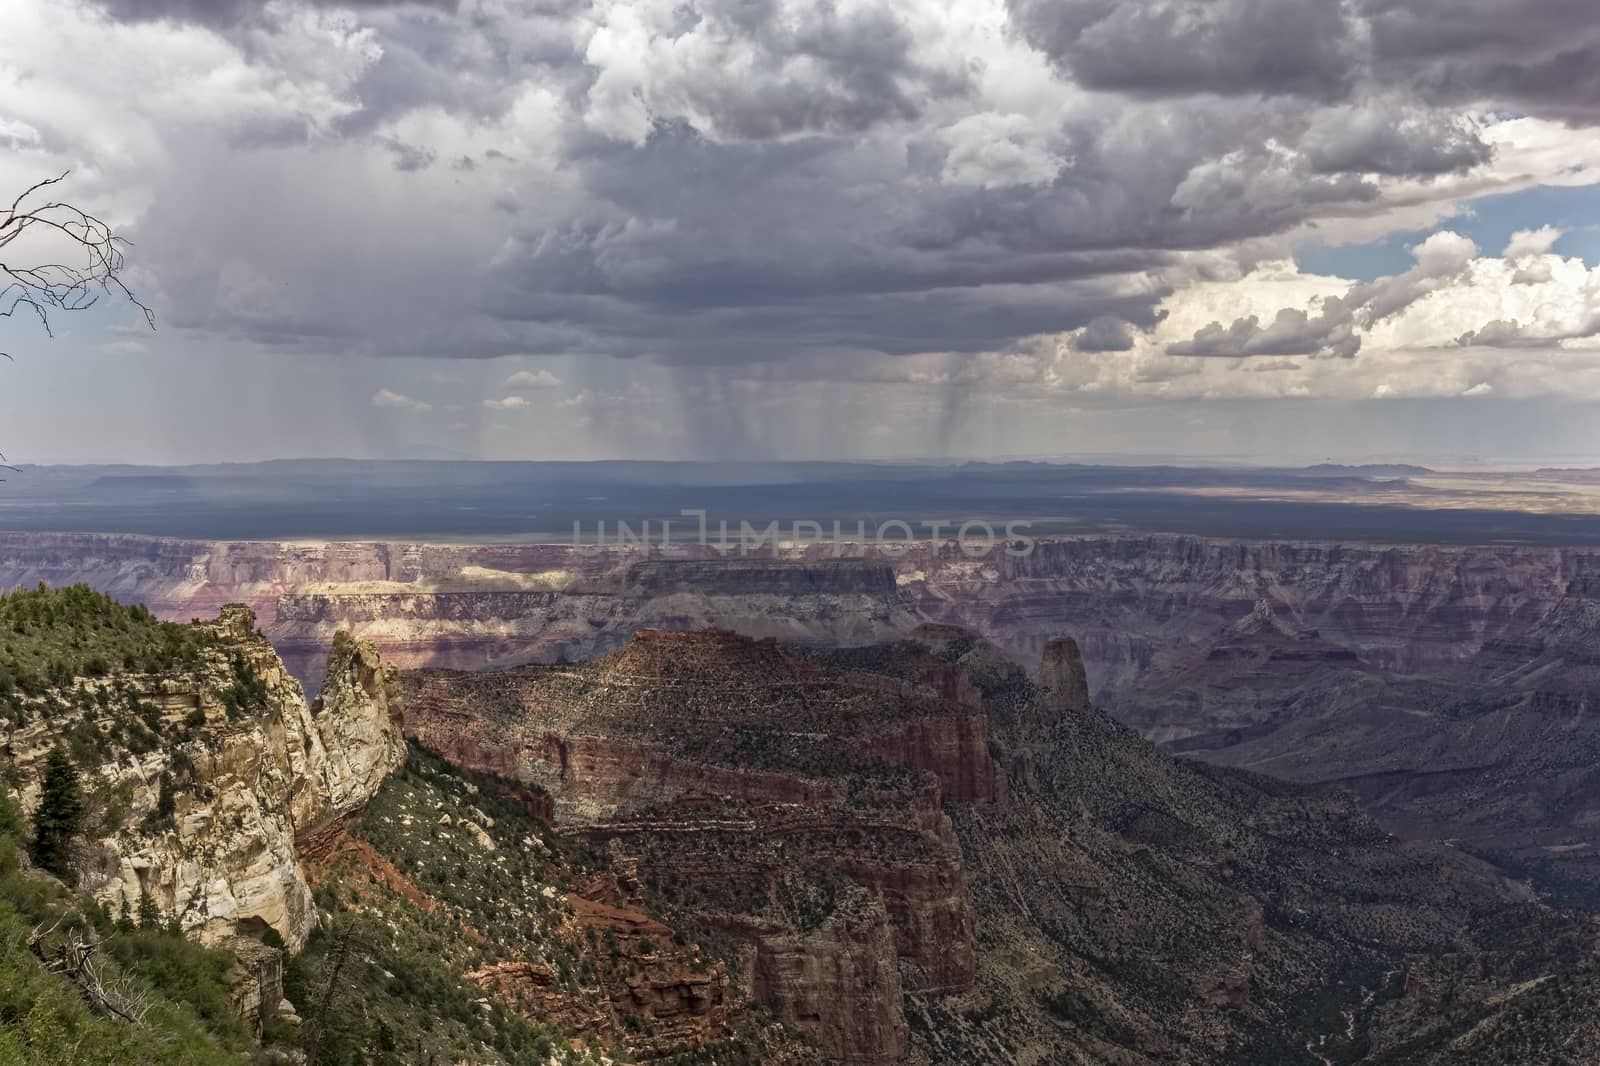 Spots of rain falling on a plateau at the Grand Canyon.